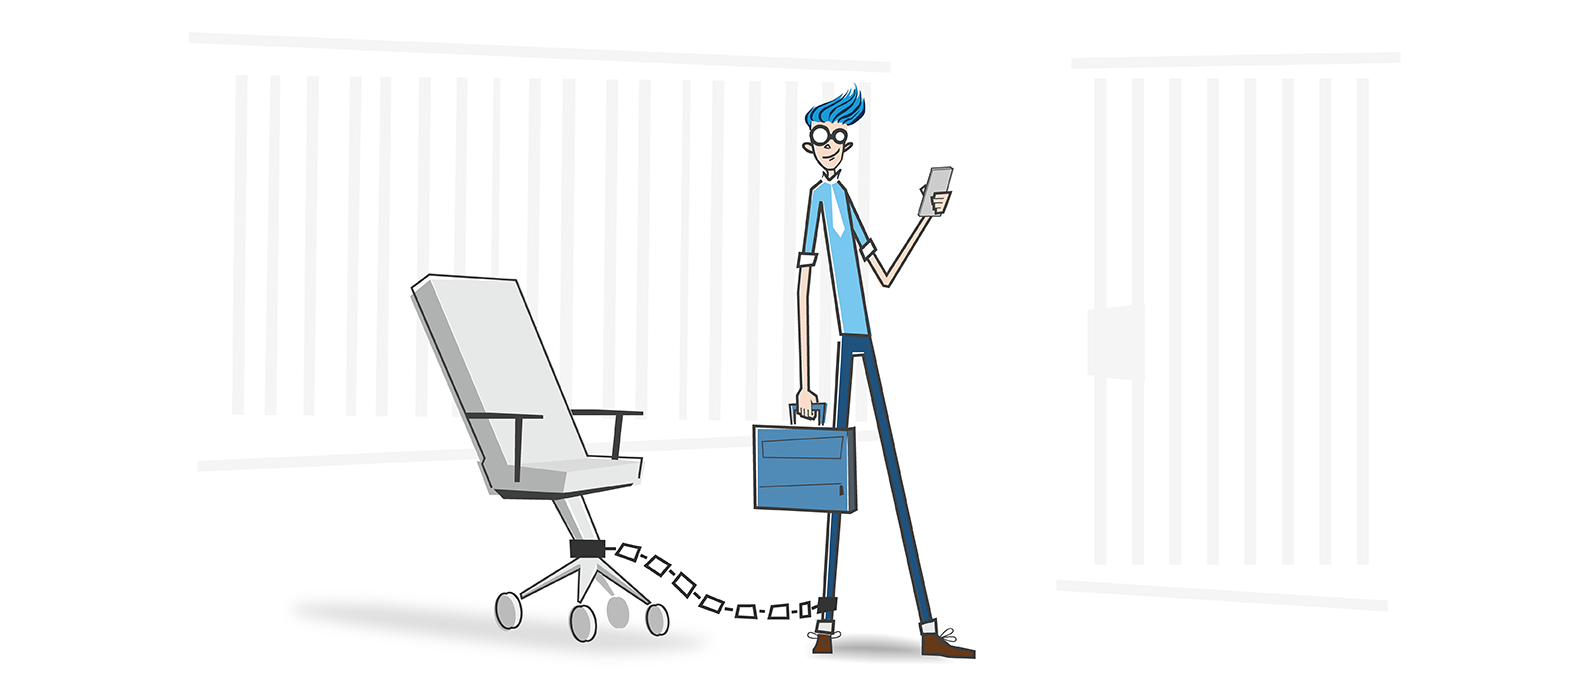 Web Apps illustration.  Diesel character chained to officer chair holding cell phone.